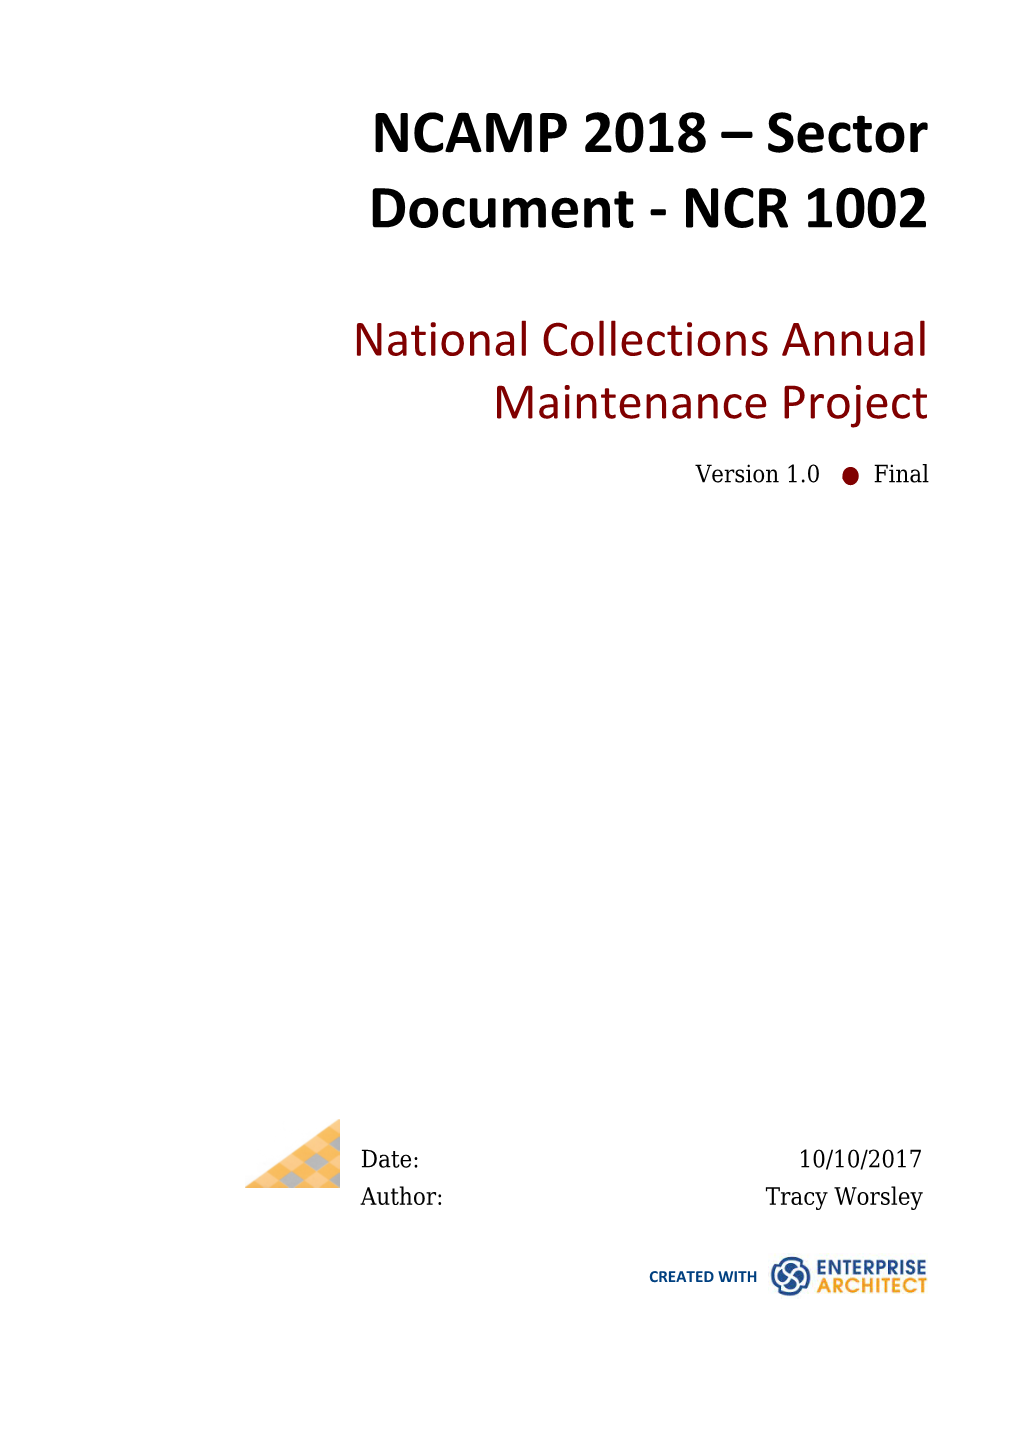 National Collections Annual Maintenance Project